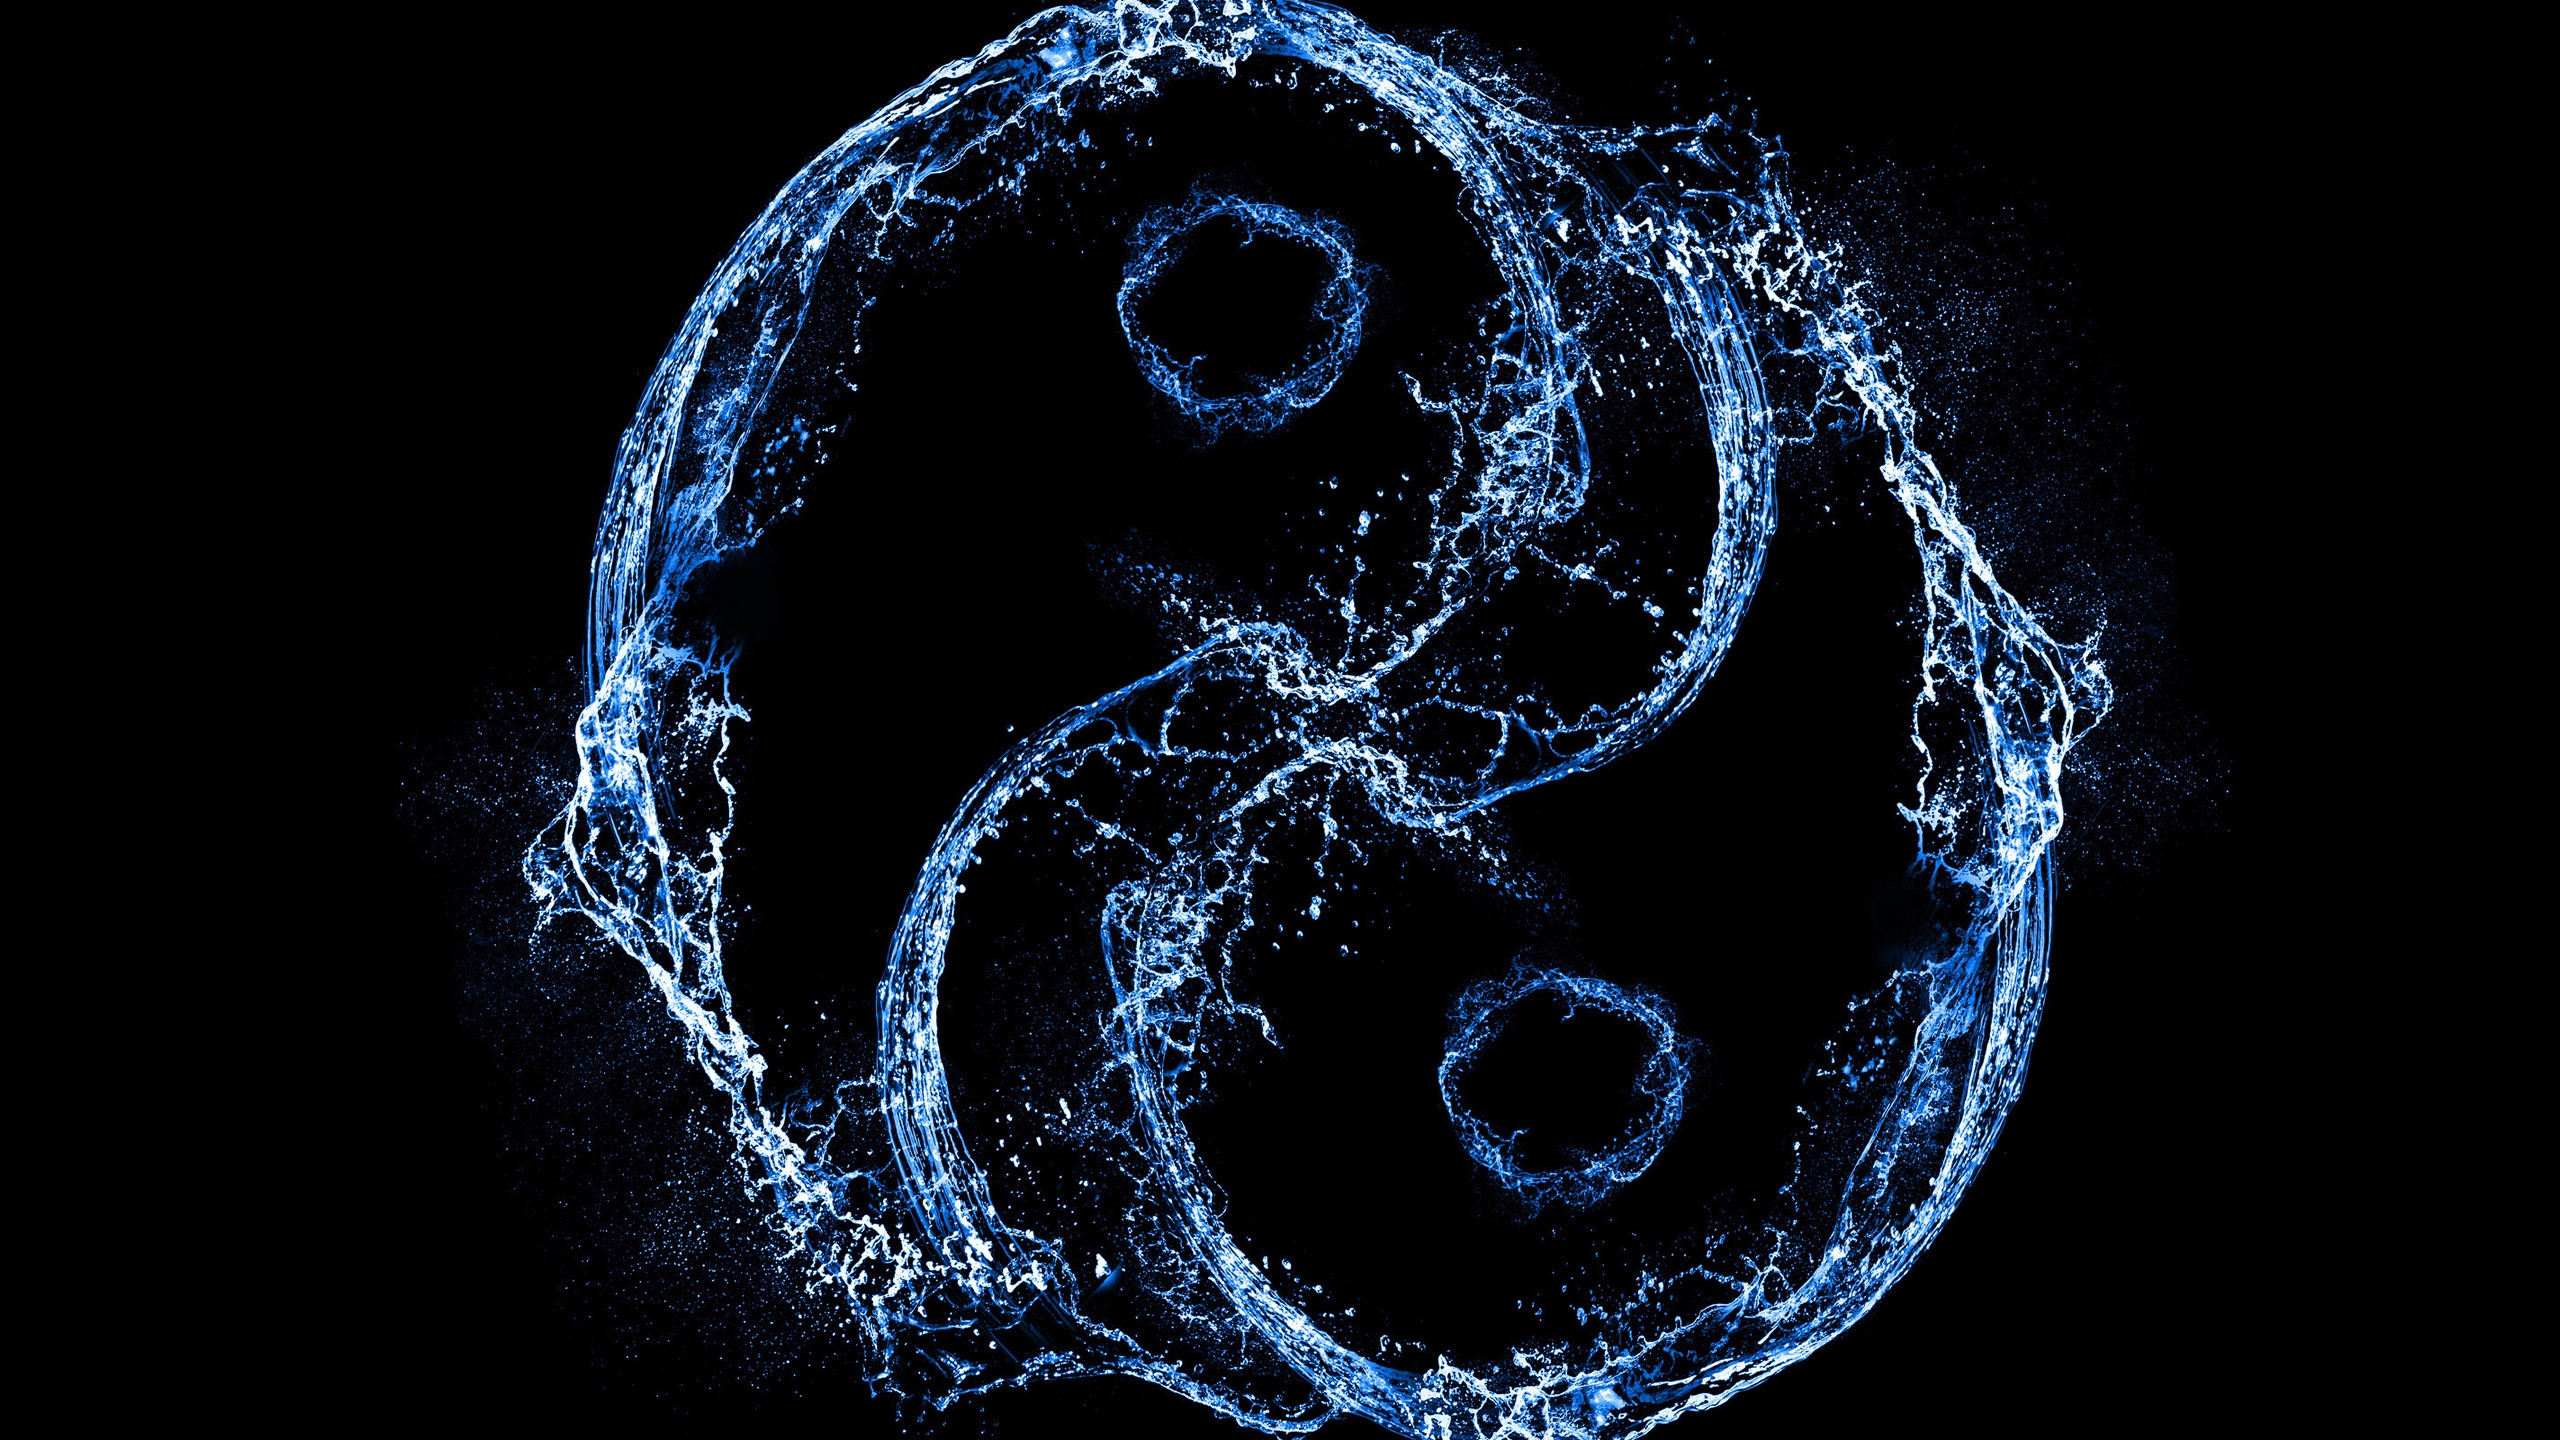 Water Ying and Yang for 2560x1440 HDTV resolution